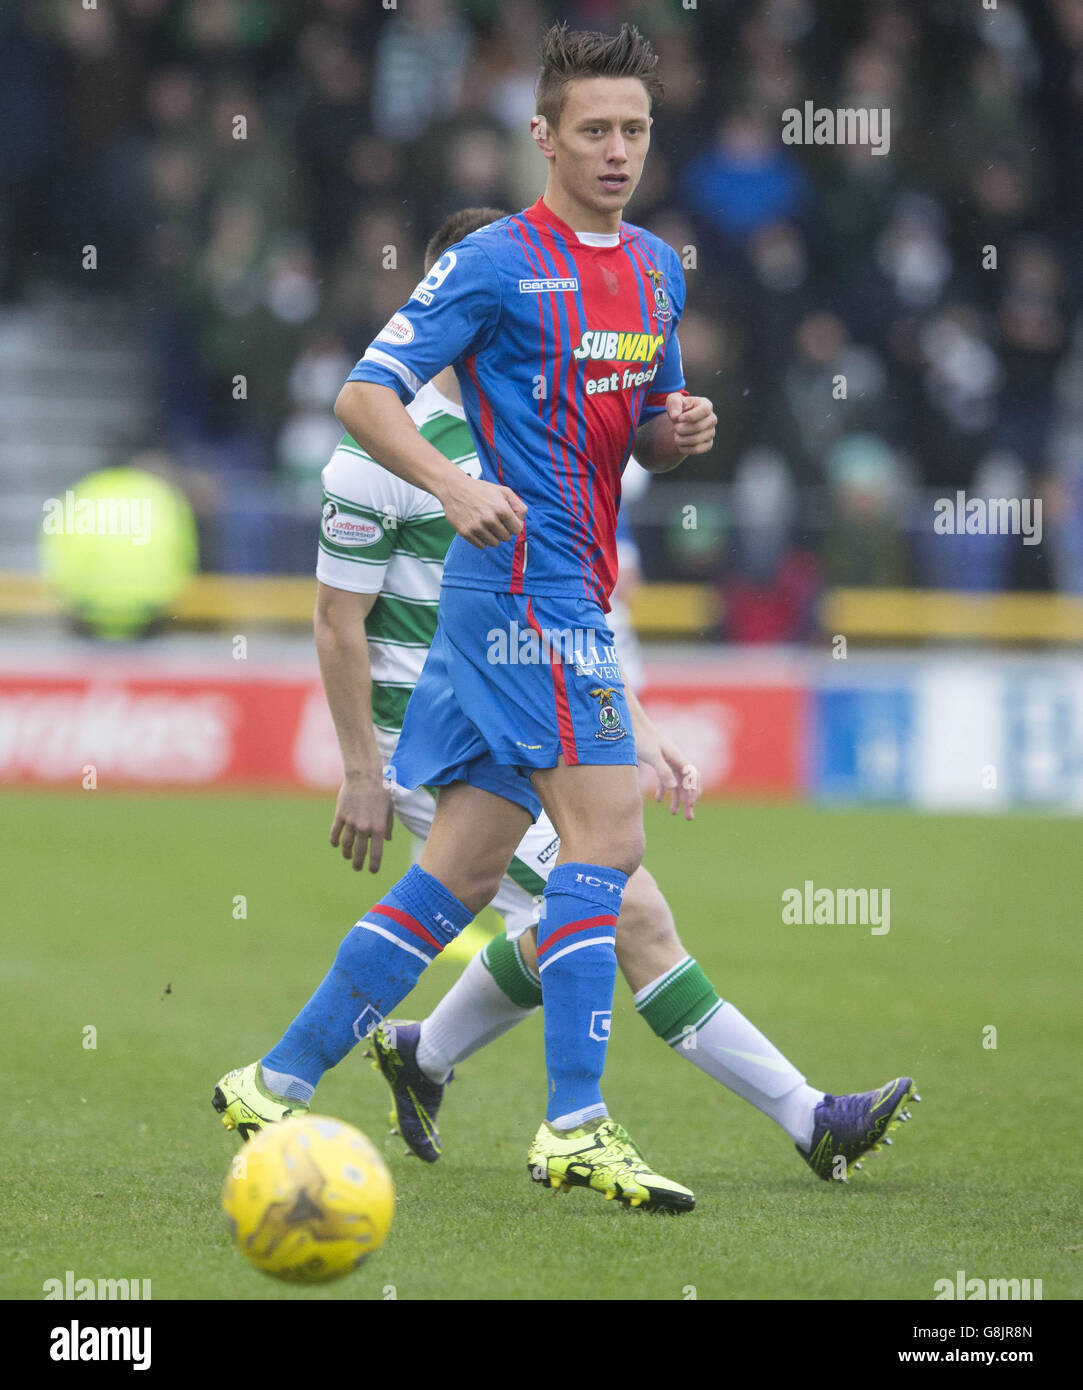 Inverness Caledonian Thistle's Danny Williams during the Ladbrokes Scottish Premiership at Caledonian Stadium, Inverness. PRESS ASSOCIATION Photo. Picture date: Sunday November 29, 2015. See PA story SOCCER Inverness. Photo credit should read: Jeff Holmes/PA Wire.. Stock Photo